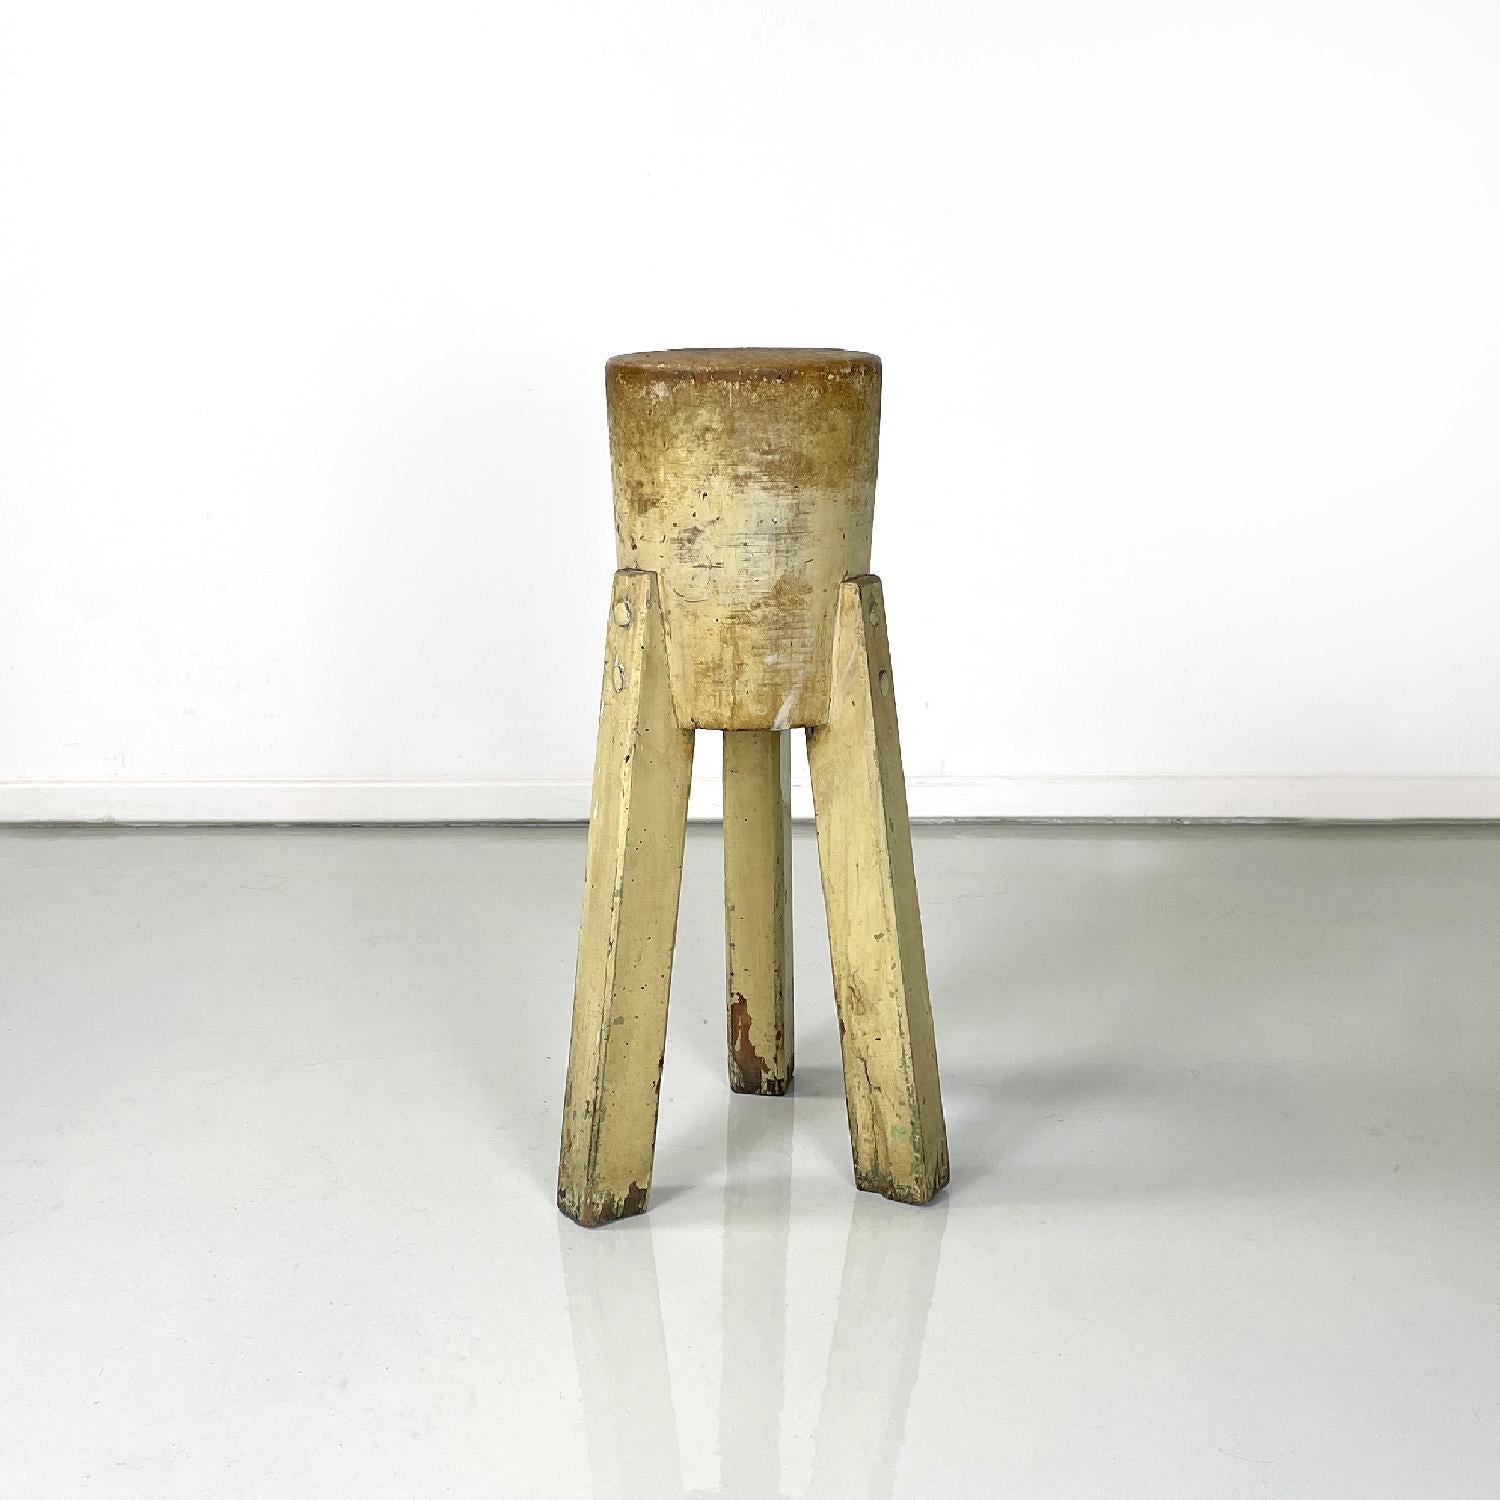 Italian rustic wooden pedestal or stool with three legs, 1970s
Rustic three-legged pedestal or stool. The seat or support is composed of a wooden cylinder to which three legs, also in wood, with a square section are joined. The item was originally